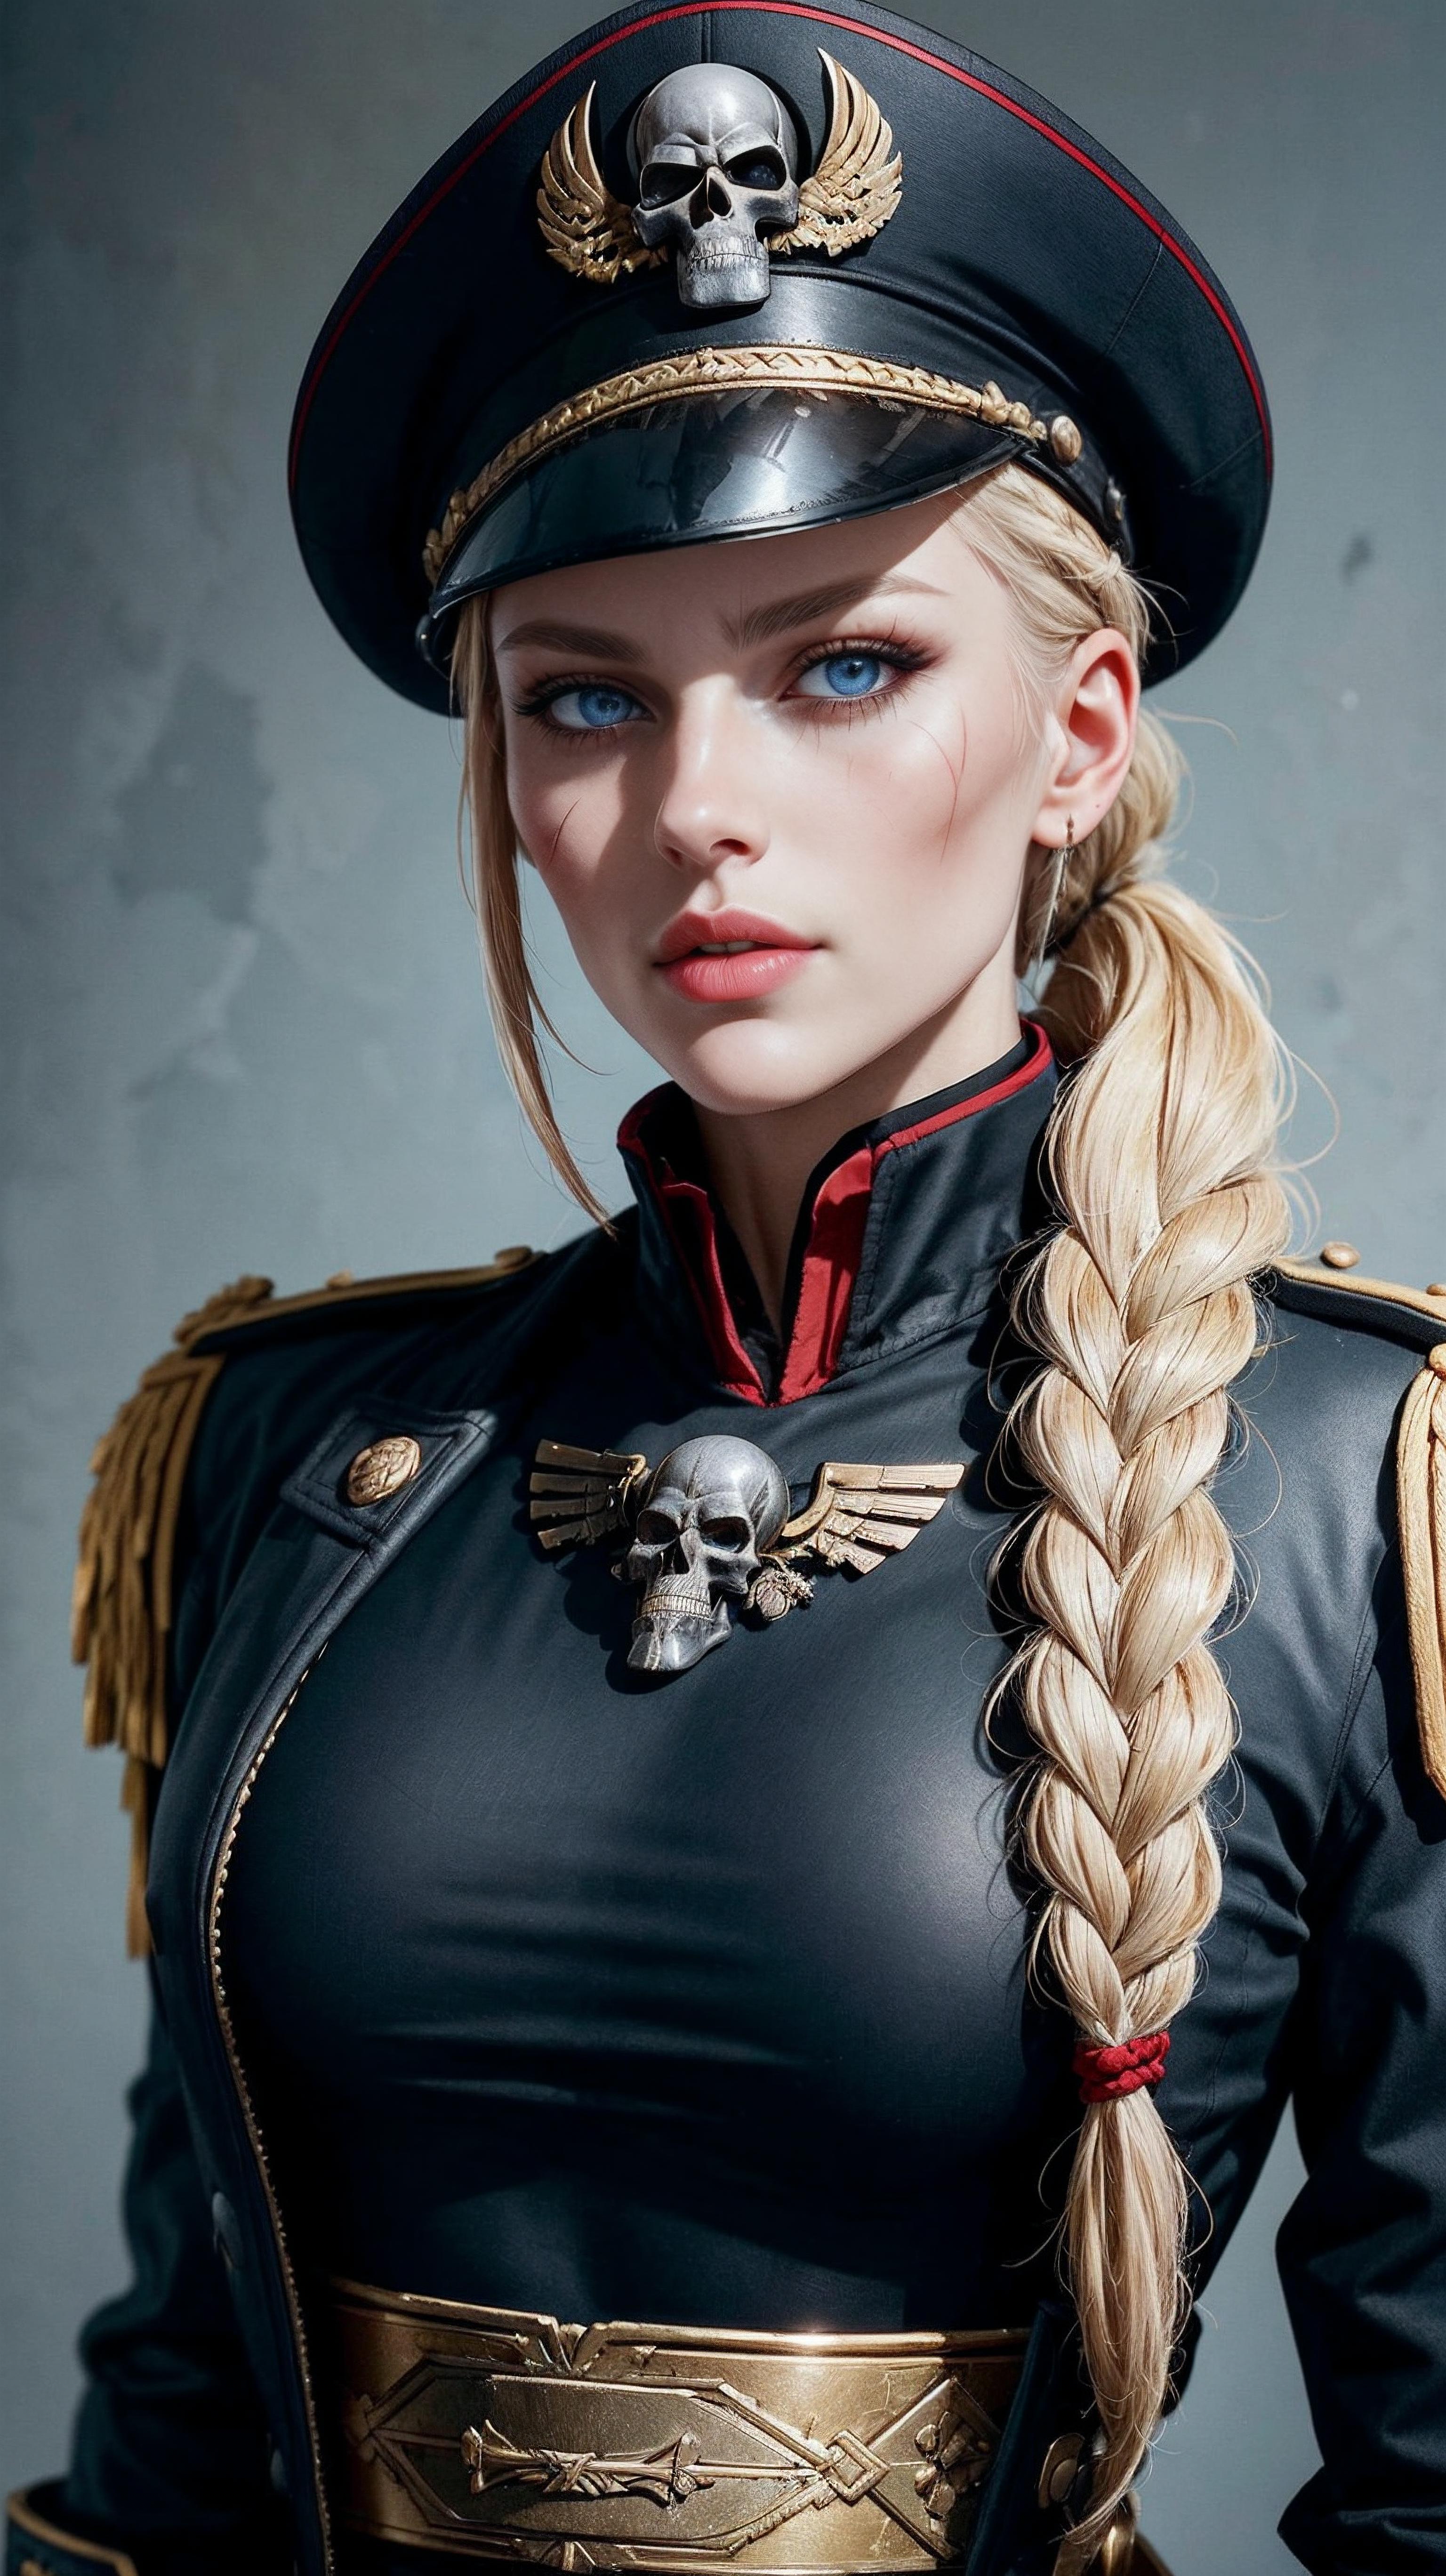 Warhammer 40K Commissar Outfit - by EDG image by BerserkFG